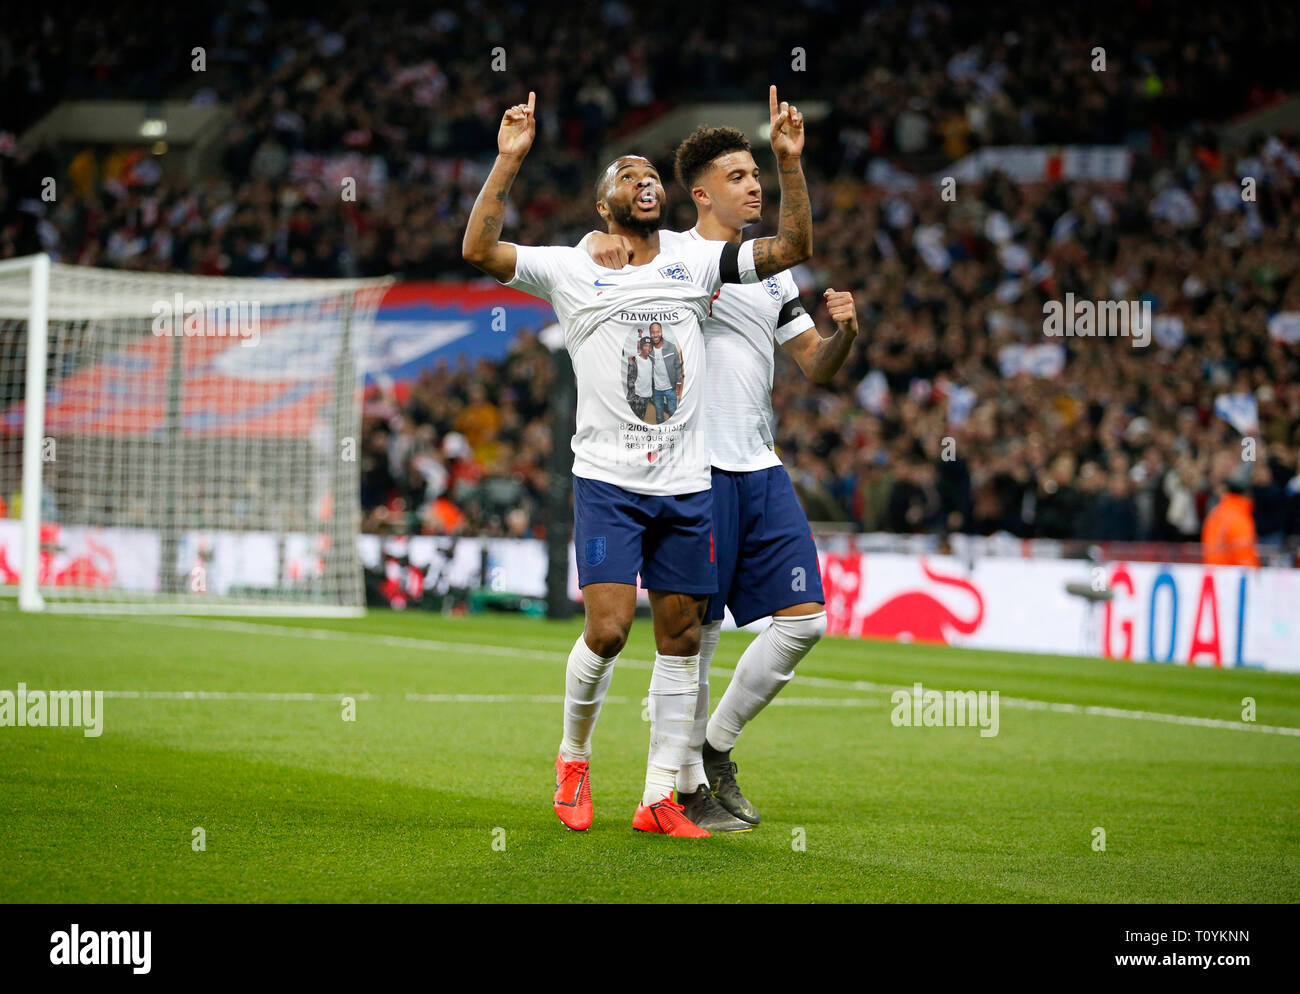 London, UK. 22nd Mar, 2019. England's Raheem Sterling (L) celebrates scoring during the Euro 2020 qualifying Group A match between England and Czech Republic at Wembley Stadium in London, Britain on March 22, 2019. England won 5-0. FOR EDITORIAL USE ONLY. NOT FOR SALE FOR MARKETING OR ADVERTISING CAMPAIGNS. NO USE WITH UNAUTHORIZED AUDIO, VIDEO, DATA, FIXTURE LISTS, CLUB/LEAGUE LOGOS OR "LIVE" SERVICES. ONLINE IN-MATCH USE LIMITED TO 45 IMAGES, NO VIDEO EMULATION. NO USE IN BETTING, GAMES OR SINGLE CLUB/LEAGUE/PLAYER PUBLICATIONS. Credit: Matthew Impey/Xinhua/Alamy Live News Stock Photo